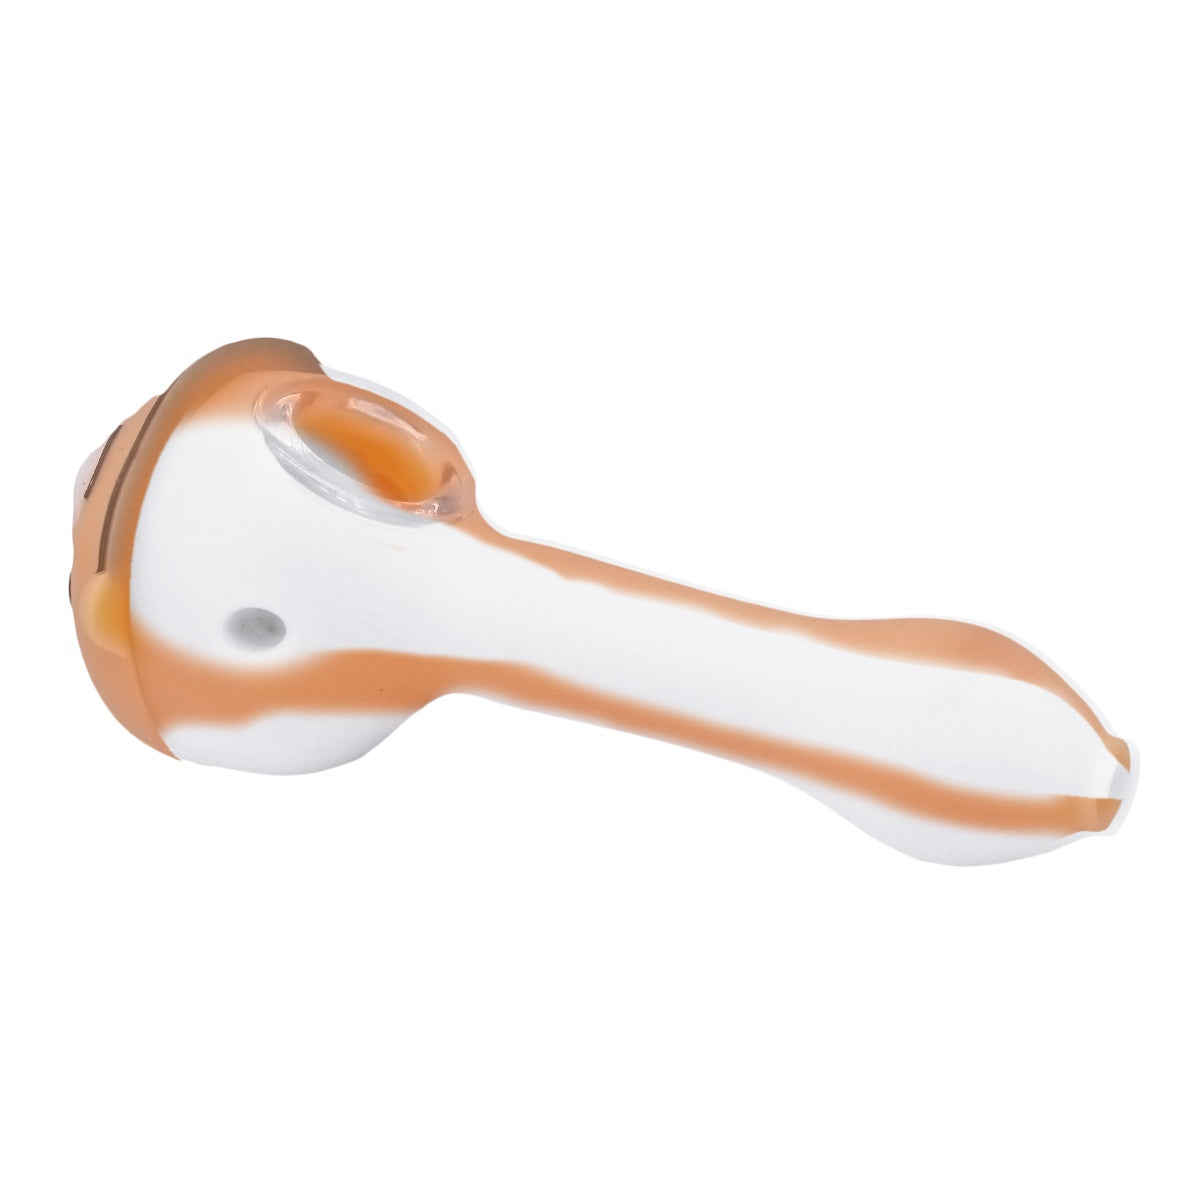 Silicone Smoking Pipe, Unbreakable with Glass Bowl, Rick Morty-2, White Orange